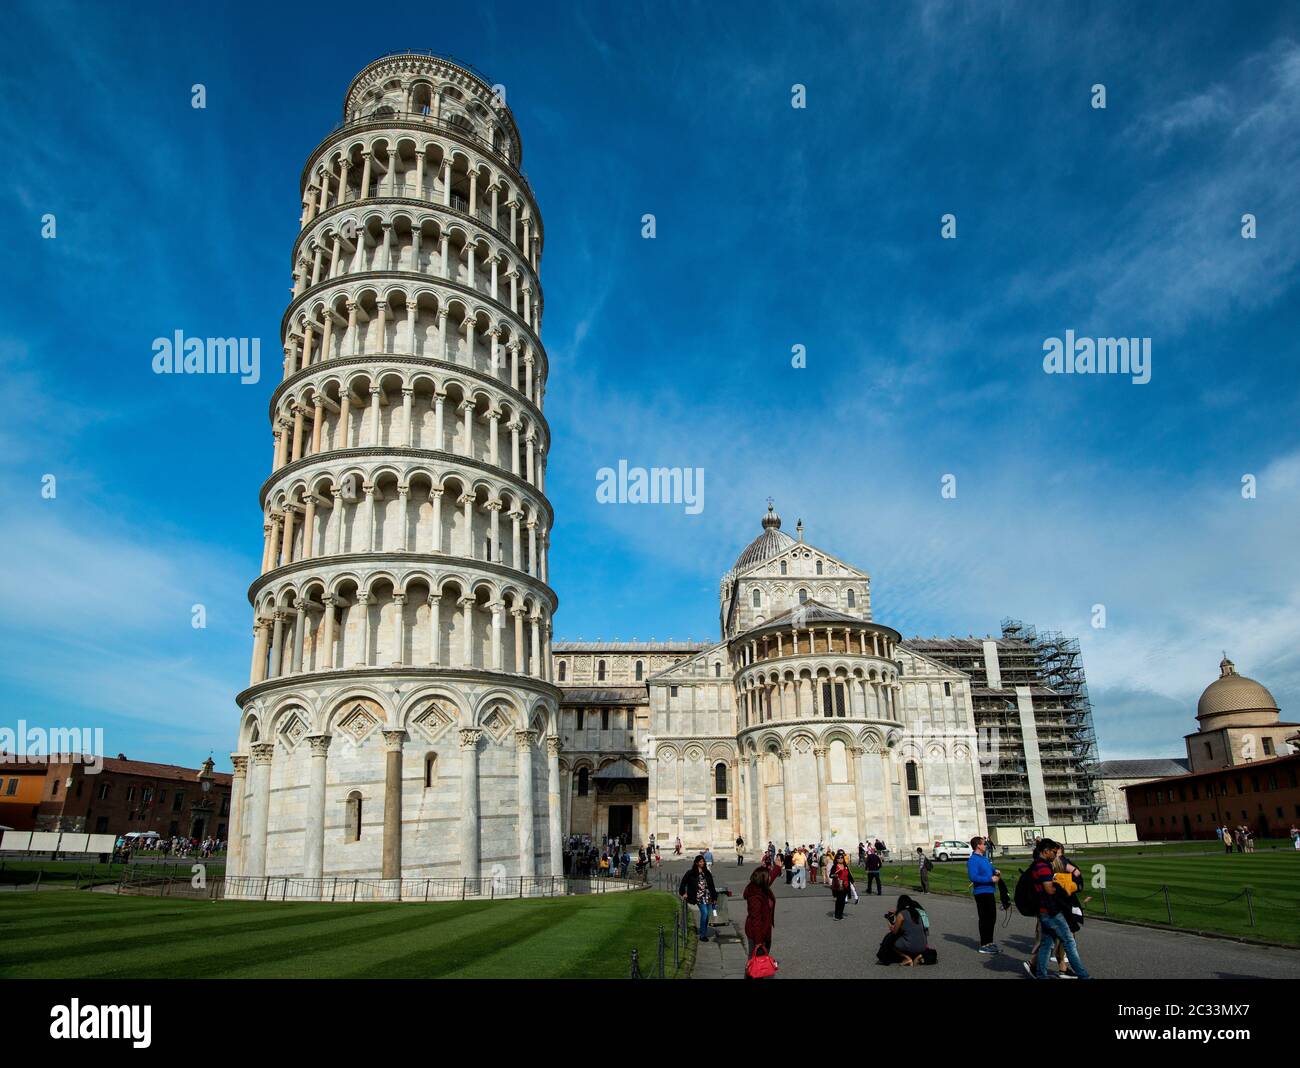 Pisa Cathedral with Leaning Tower of Pisa on Piazza dei Miracoli, Pisa, Tuscany, Italy; dedicated to the Assumption of the Virgin Mary. Stock Photo